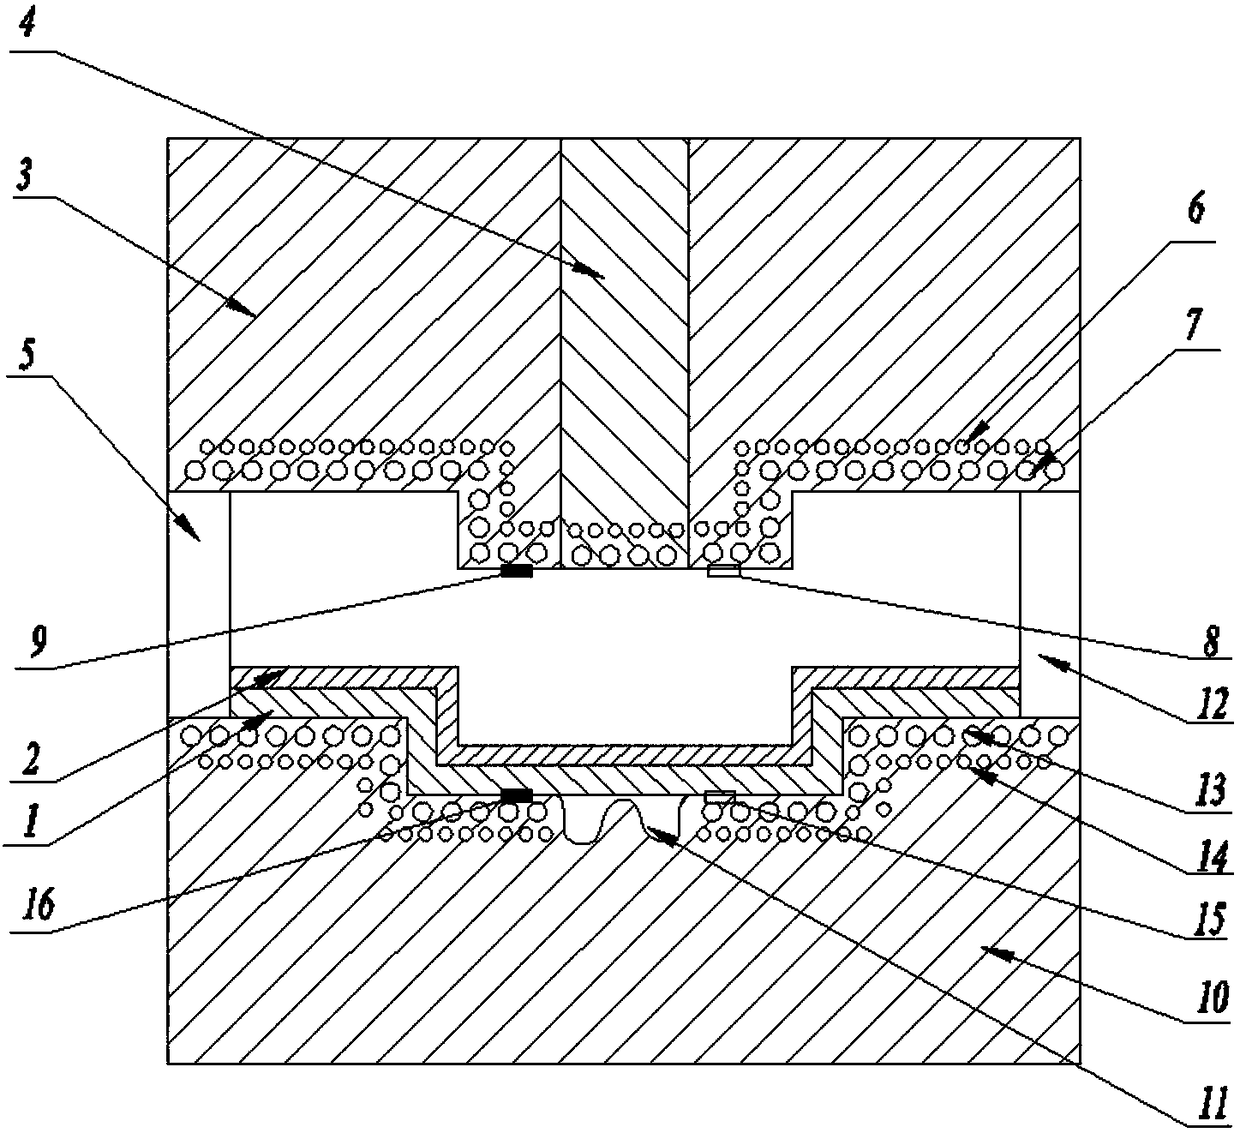 Integrated device and method for forming of carbon fiber composite material and sticky-riveting of carbon fiber composite material and metal sheet piece